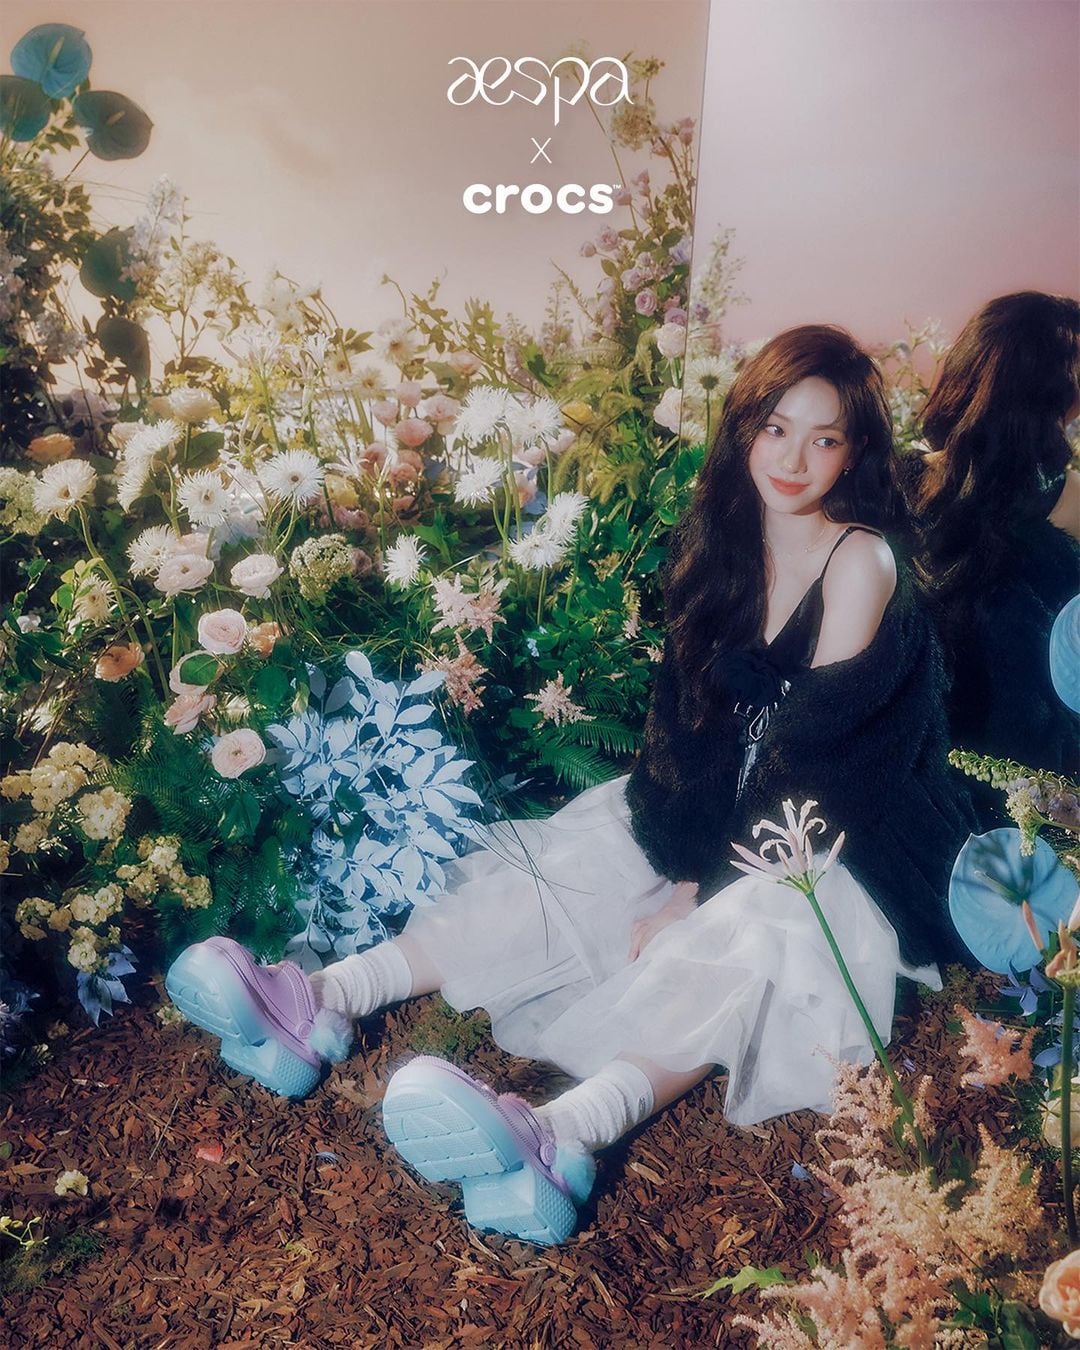 231004 Crocs Instagram Update with aespa - A world of Better Things are waiting for you! aespa x Crocs are finally here!